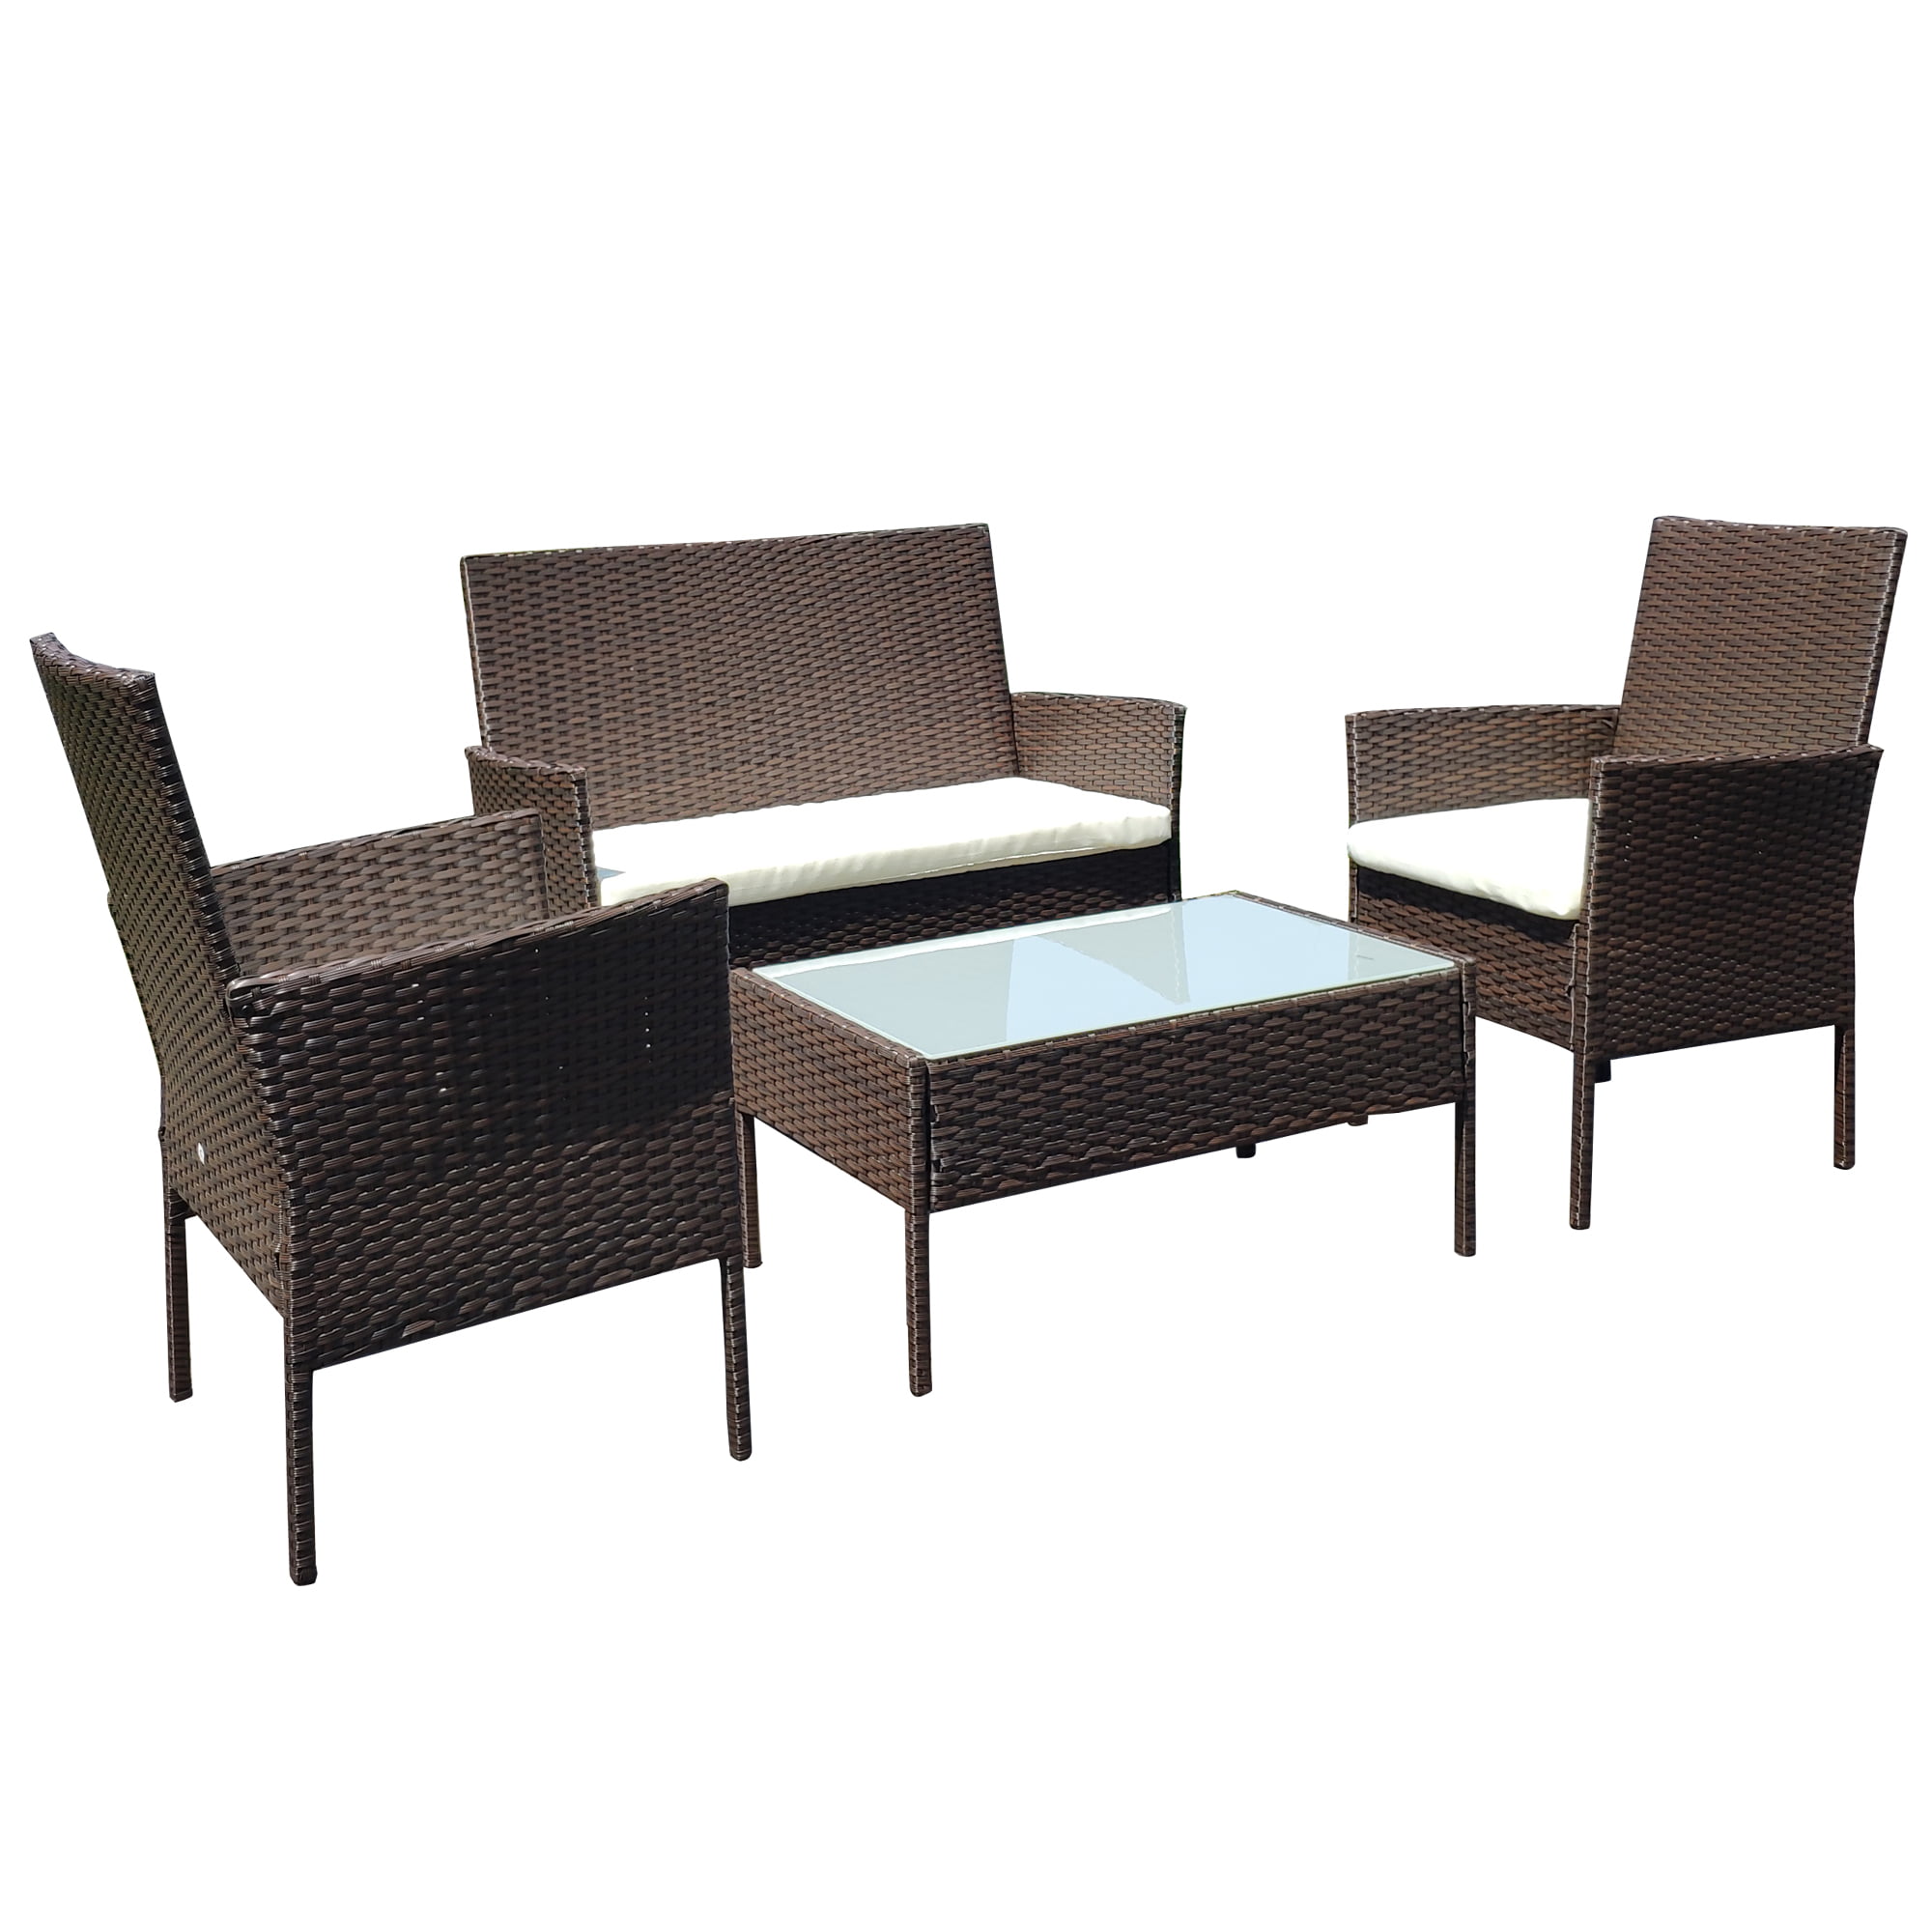 DORTALA 4 Pieces Patio Wicker Conversation Furniture Set Bistro Sets with Coffee Table for Courtyard Balcony Garden Wicker Chairs with Soft Cushion and Table with Tempered Glass White Outdoor Rattan Sofas with Tempered Glass Coffee Table 